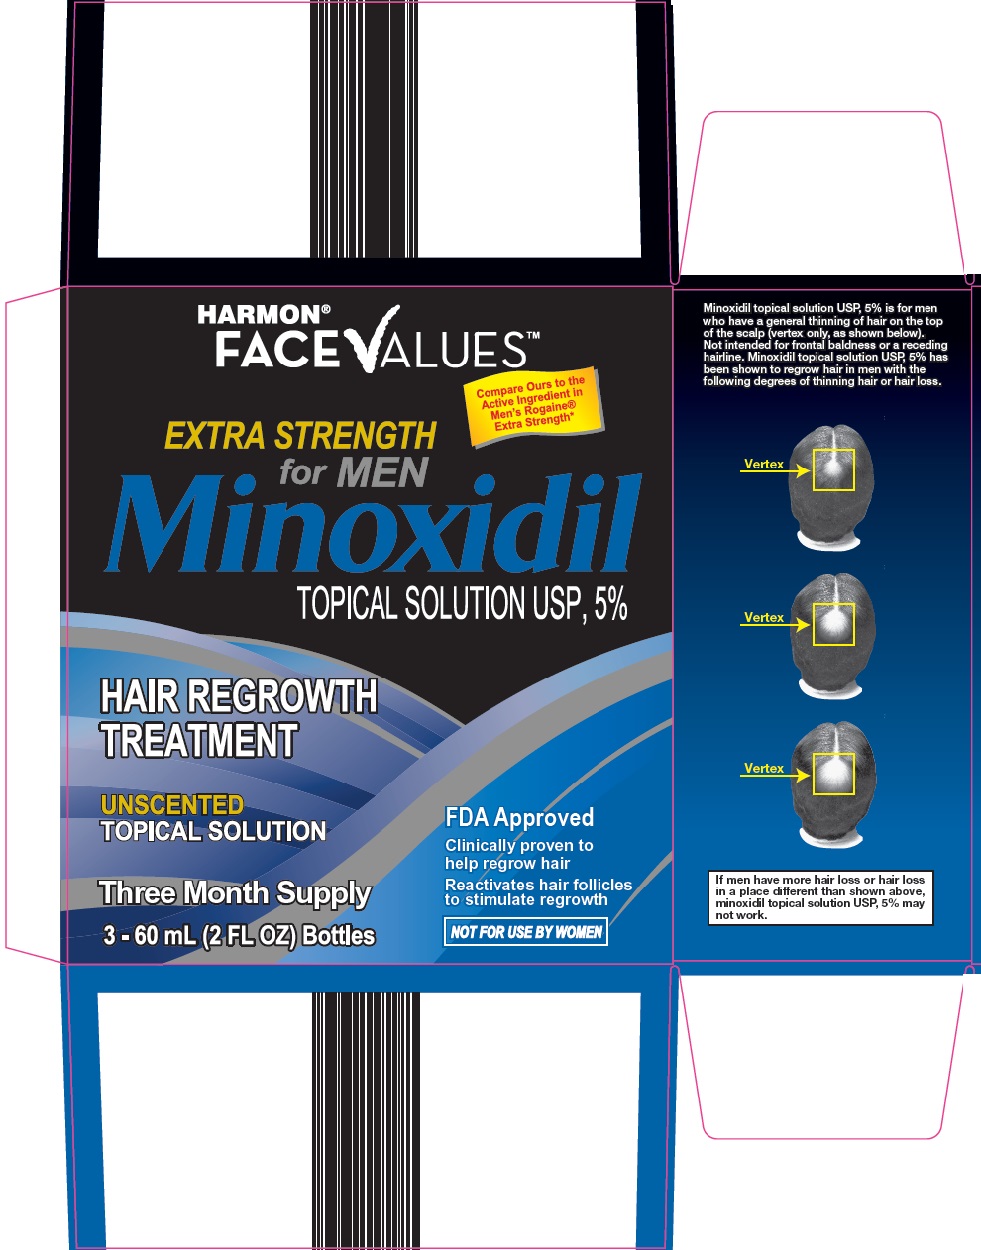 Harmon Face Values Minoxidil Topical Solution Image 1